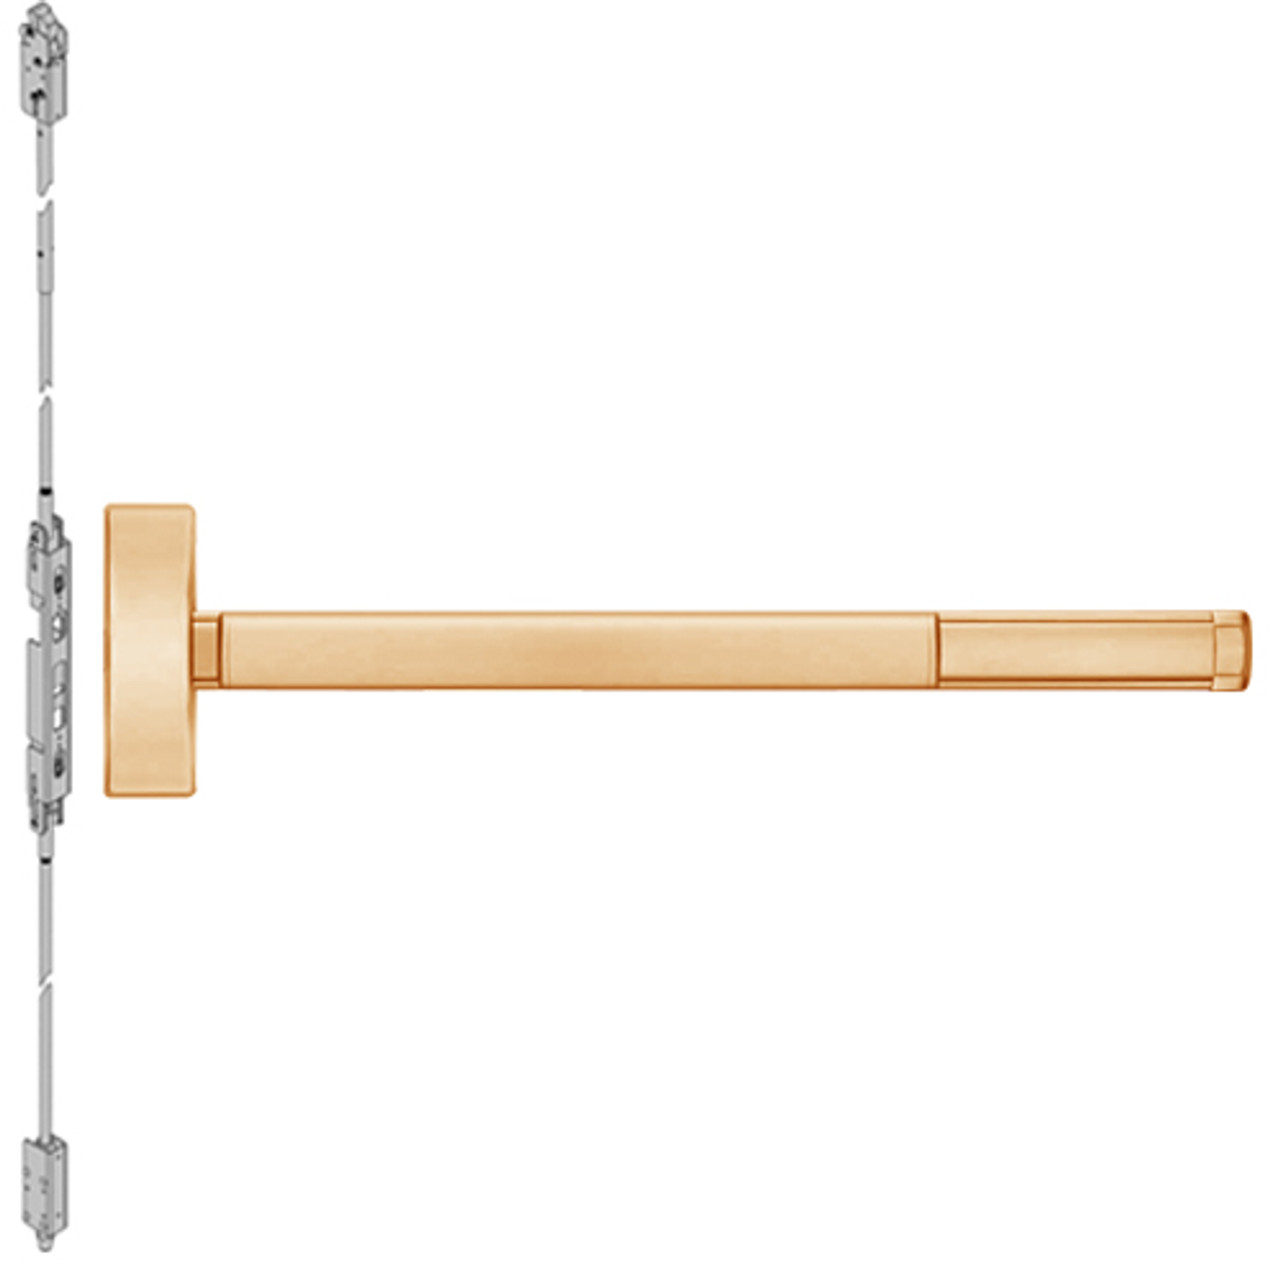 DEFL2814LBR-612-36 PHI 2800 Series Fire Rated Concealed Vertical Rod Exit Device with Delayed Egress Prepped for Lever-Knob Always Active in Satin Bronze Finish